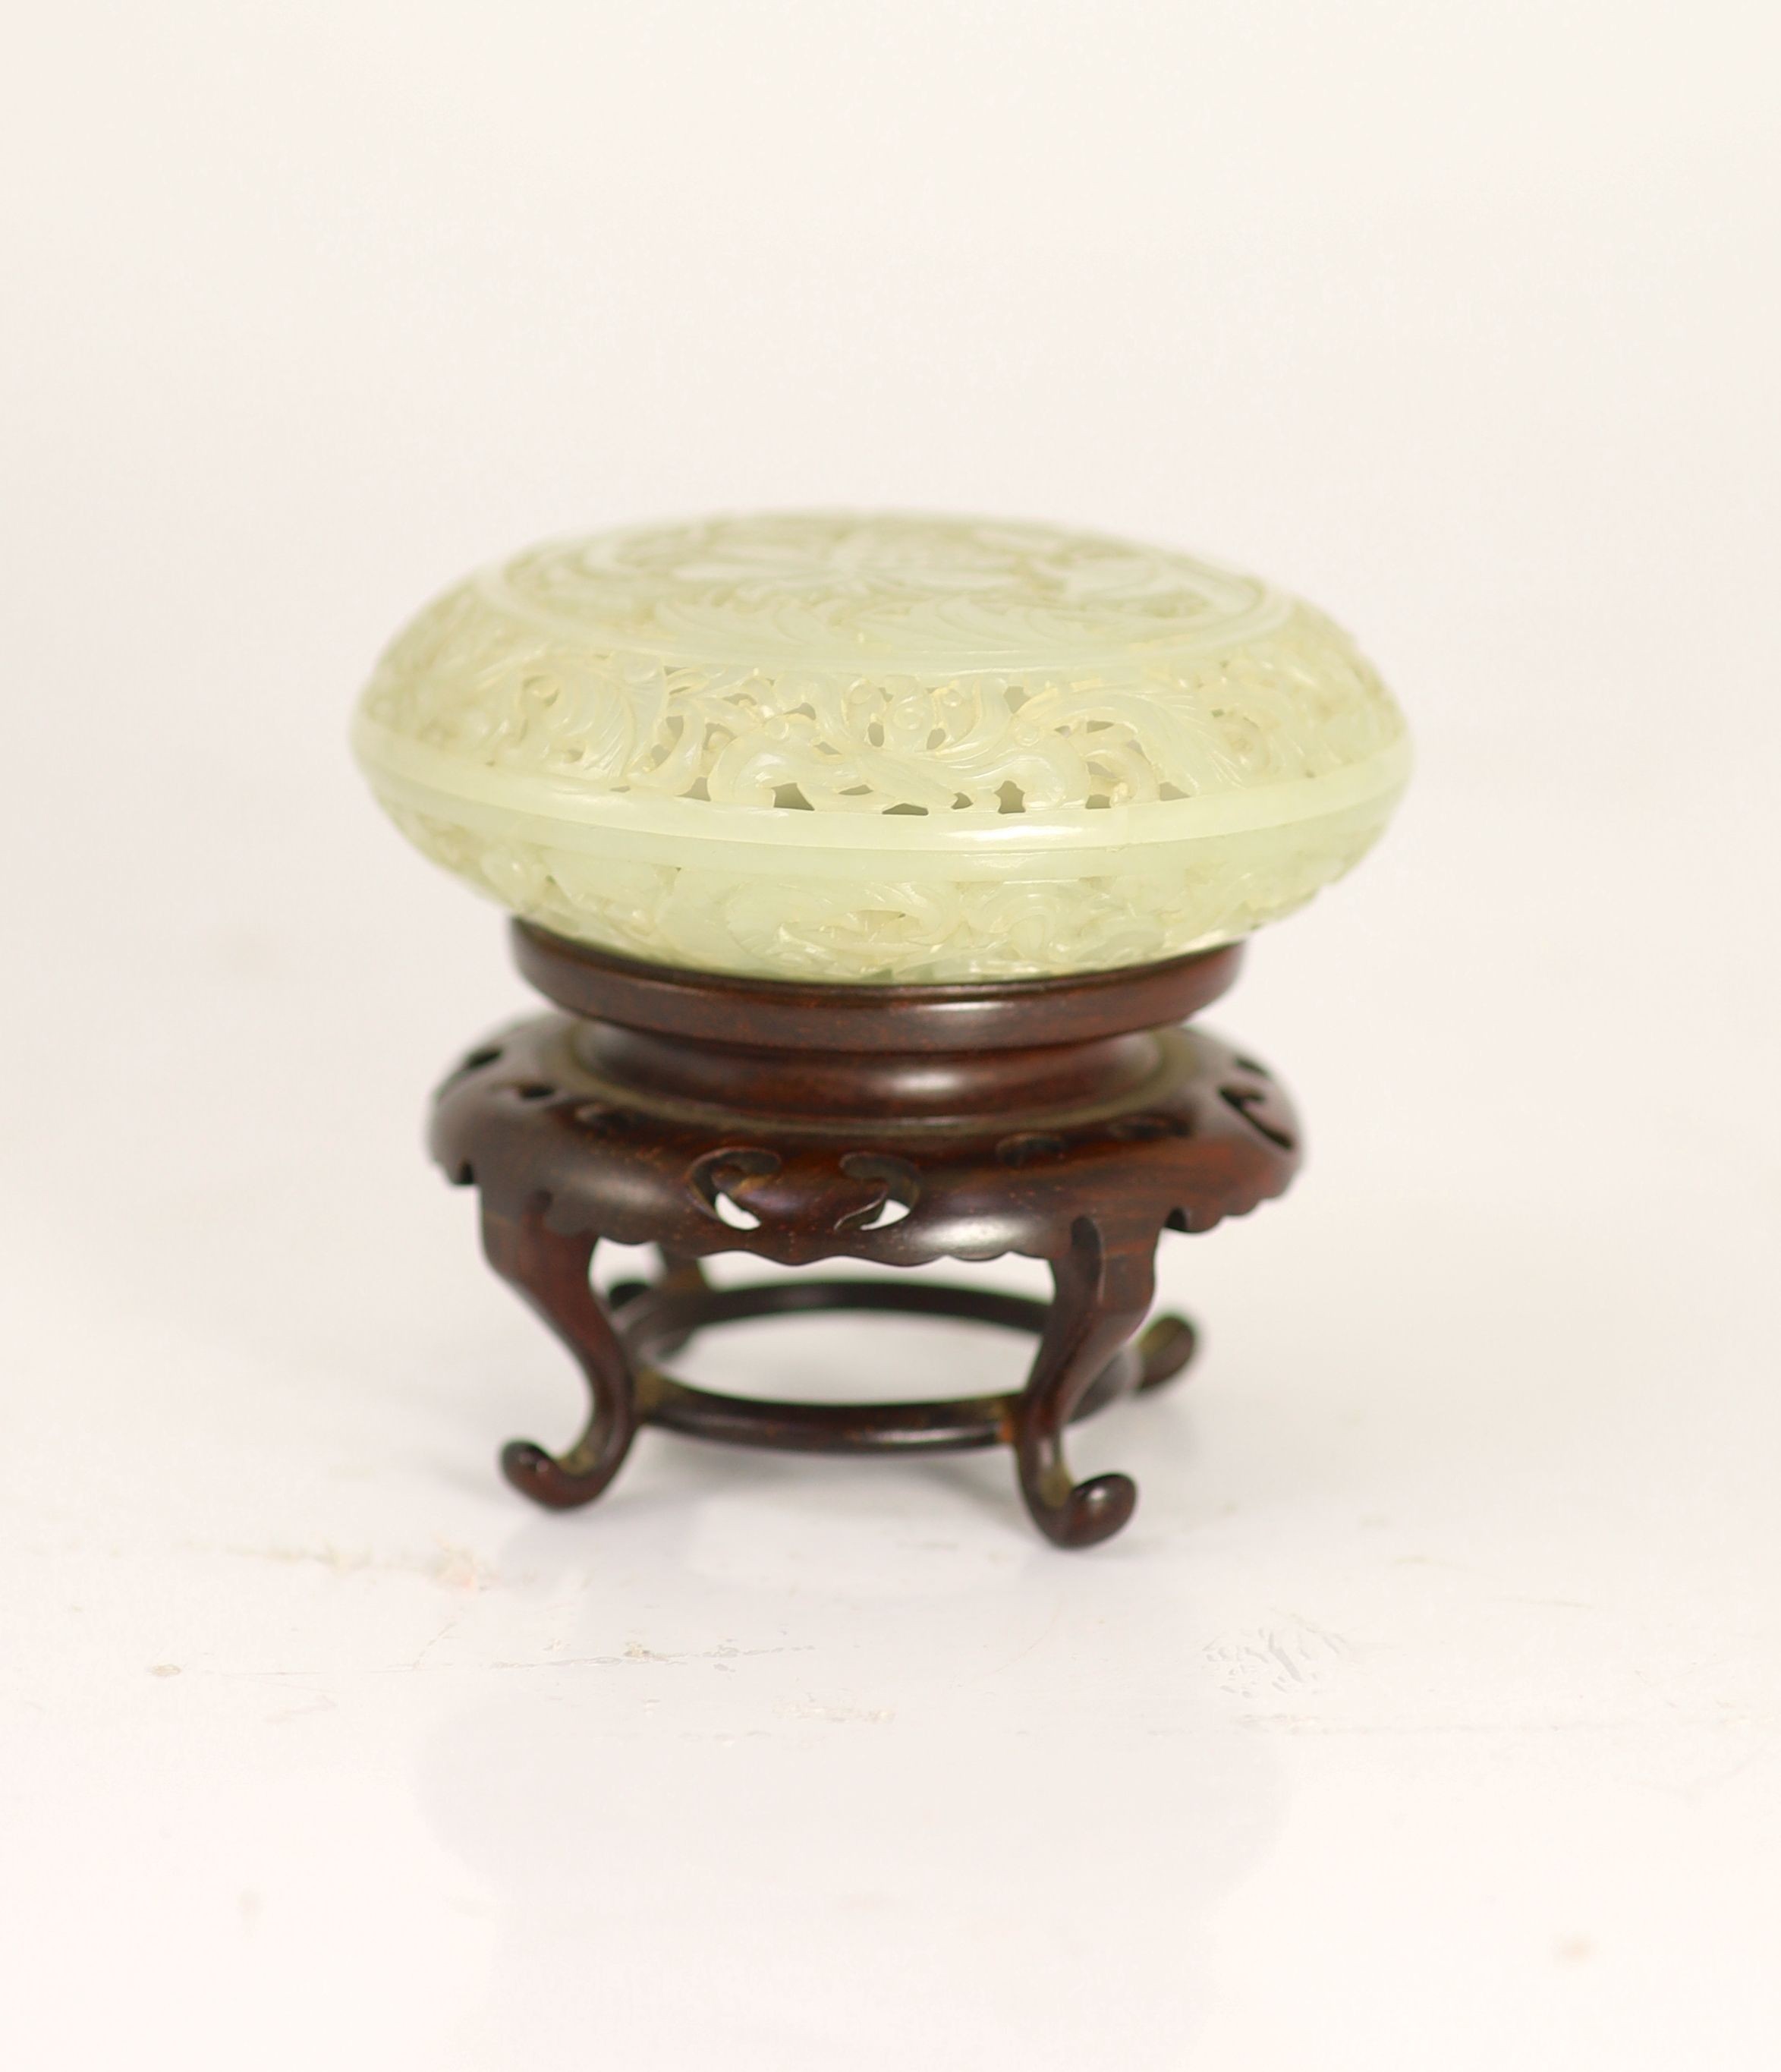 A fine Chinese pale celadon jade reticulated box and cover, 18th century, 9cm diameter, wood stand